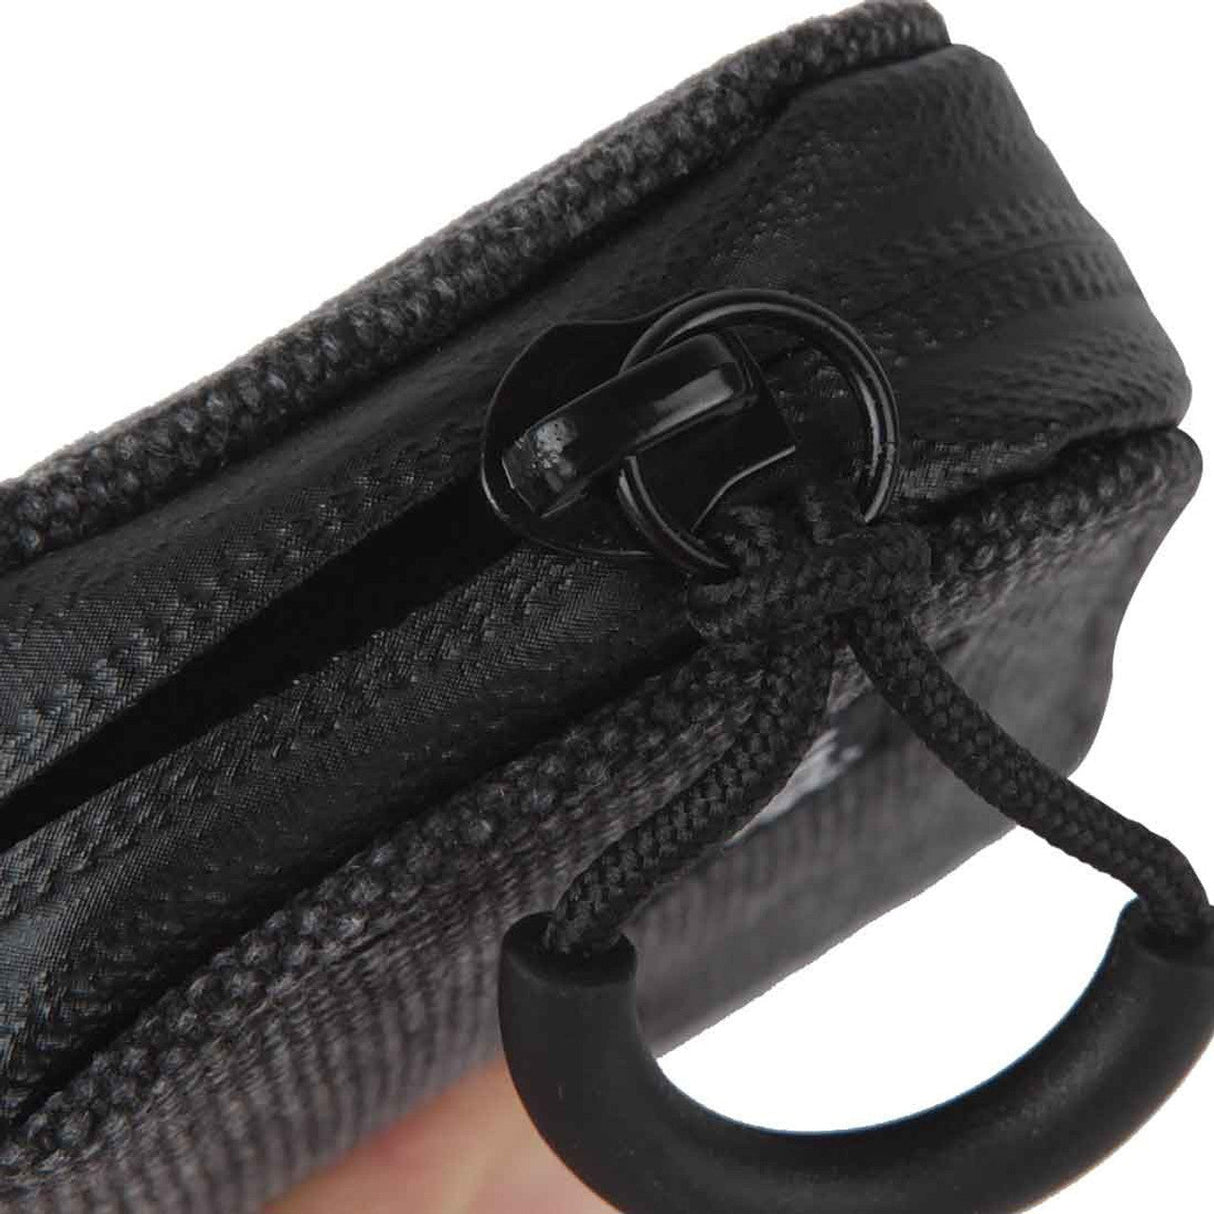 Close-up of RYOT SmellSafe Krypto-Kit in Black, highlighting the durable zipper and fabric